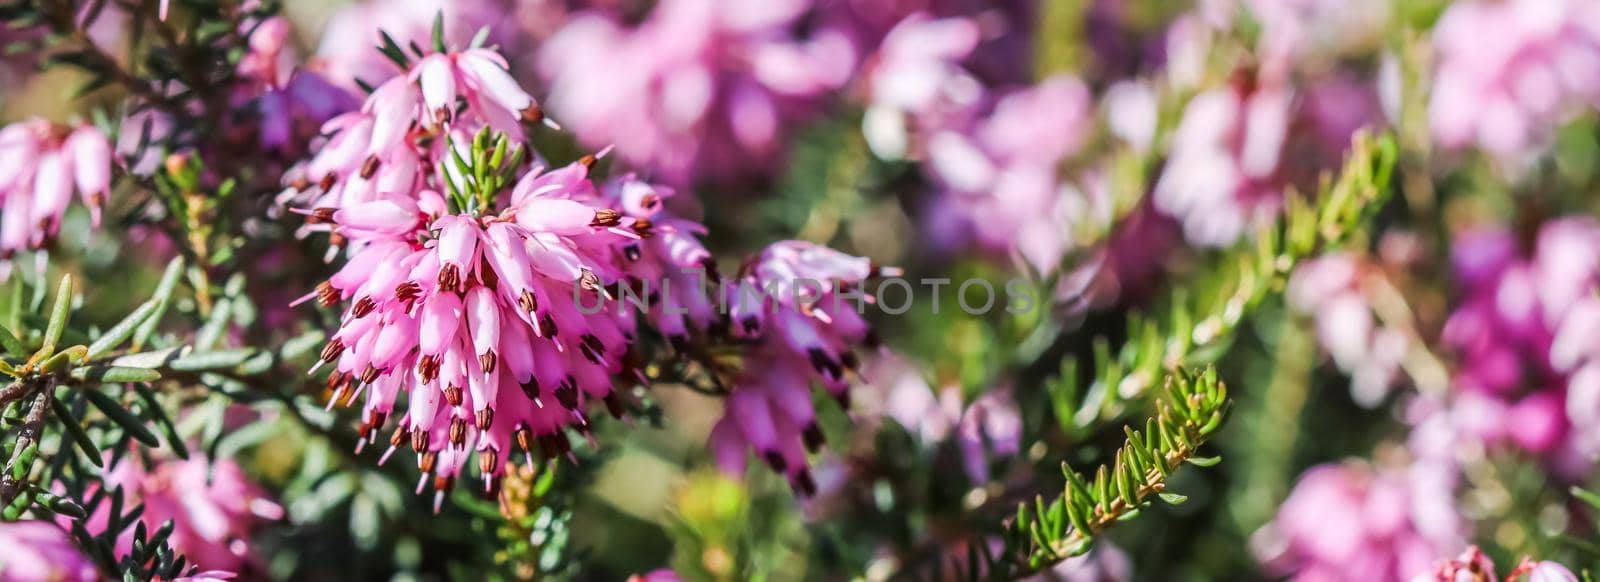 Pink Erica carnea flowers (winter Heath) in the garden in early spring. Floral background, botanical concept